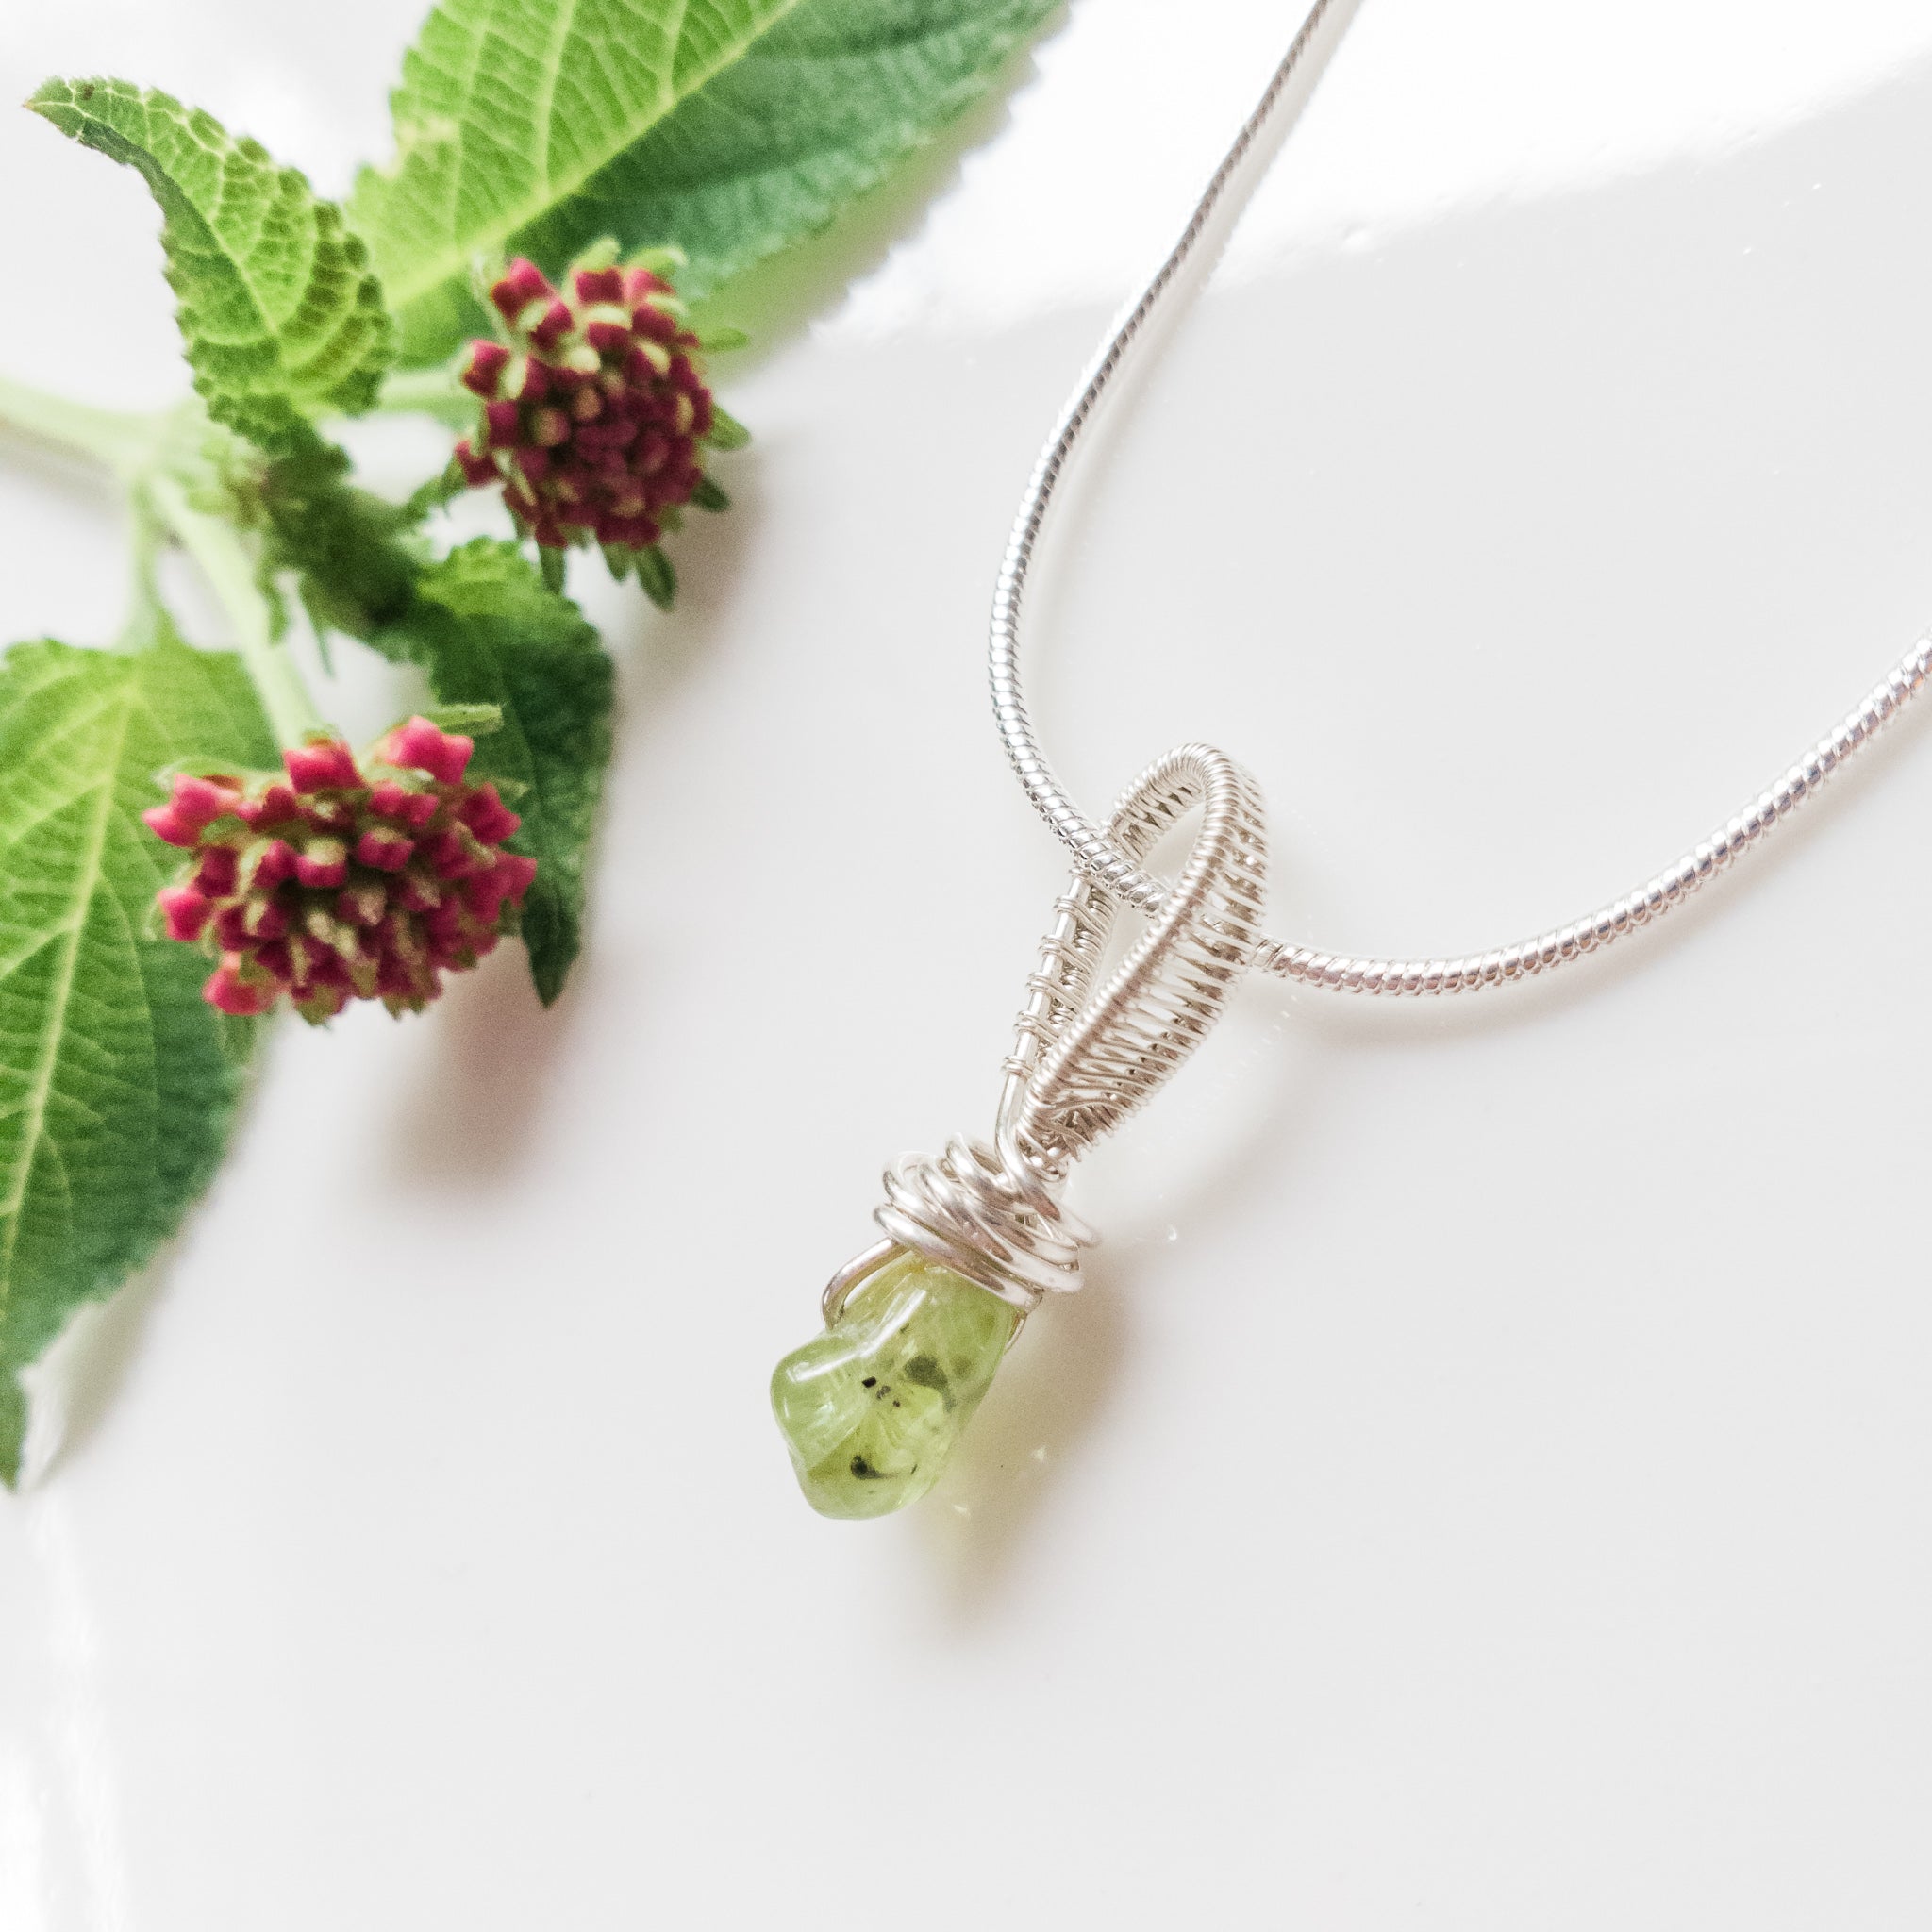 Rio Collection - Dainty Peridot Pendant Necklace in Sterling Silver close-up view - BellaChel Jeweler